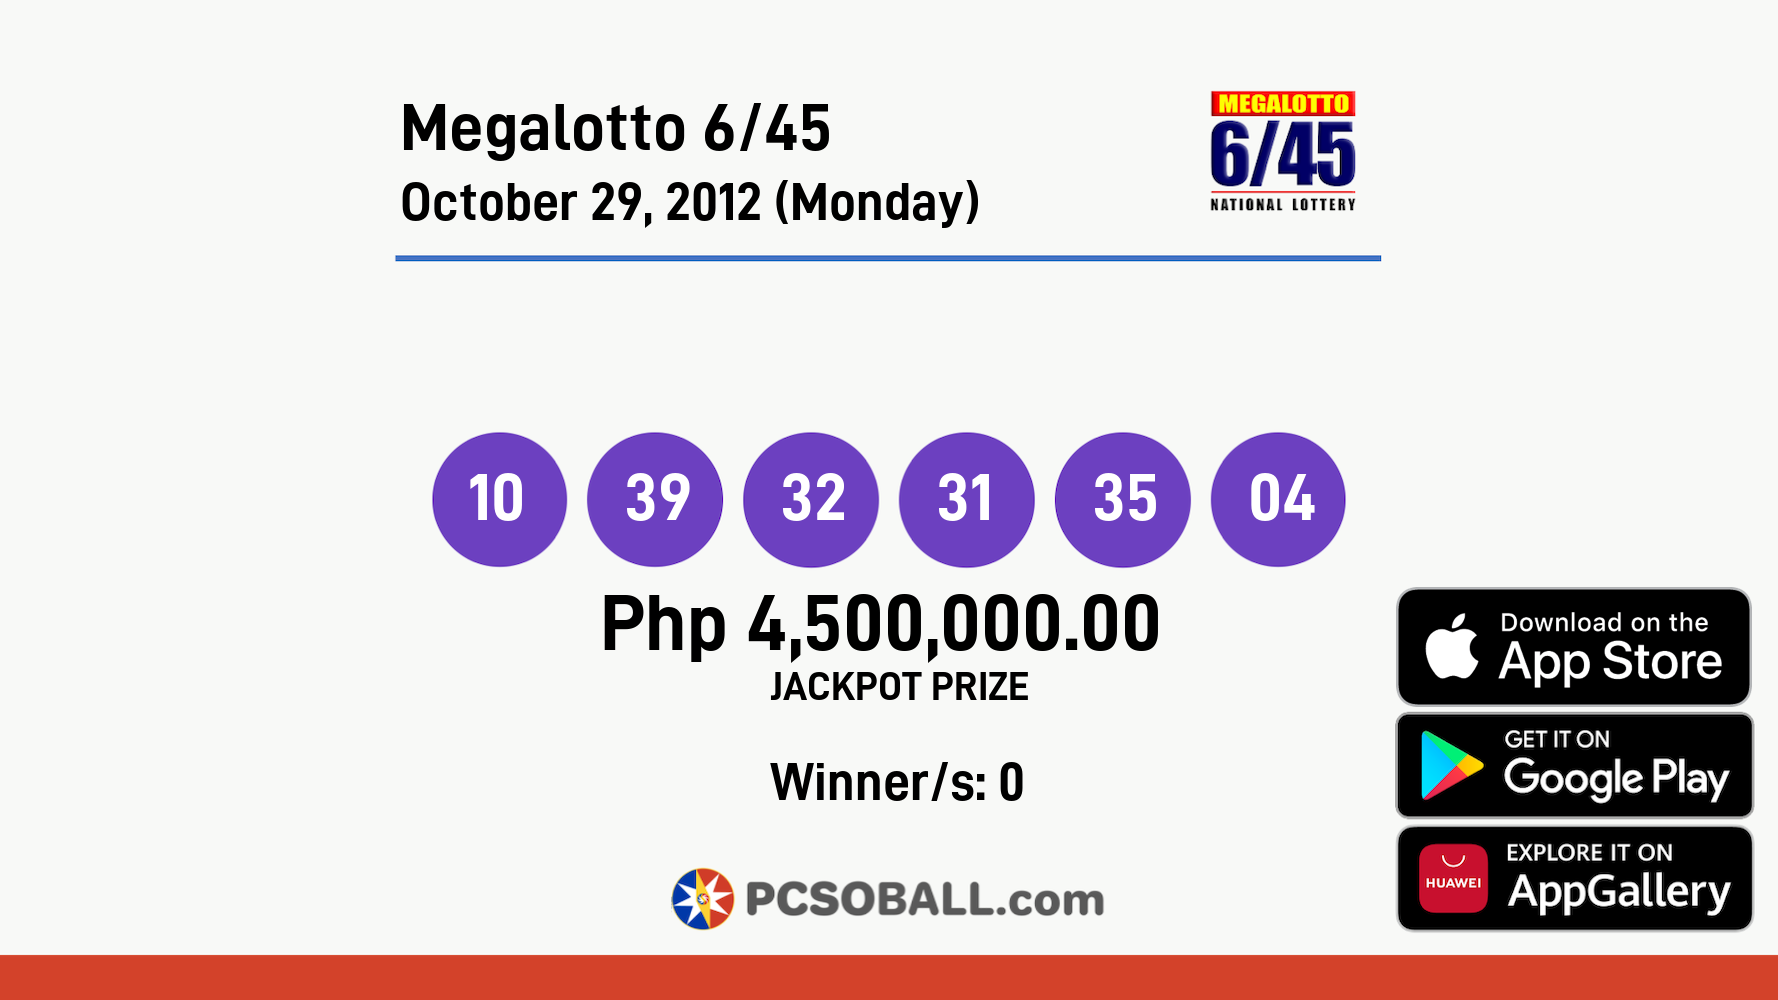 Megalotto 6/45 October 29, 2012 (Monday) Result